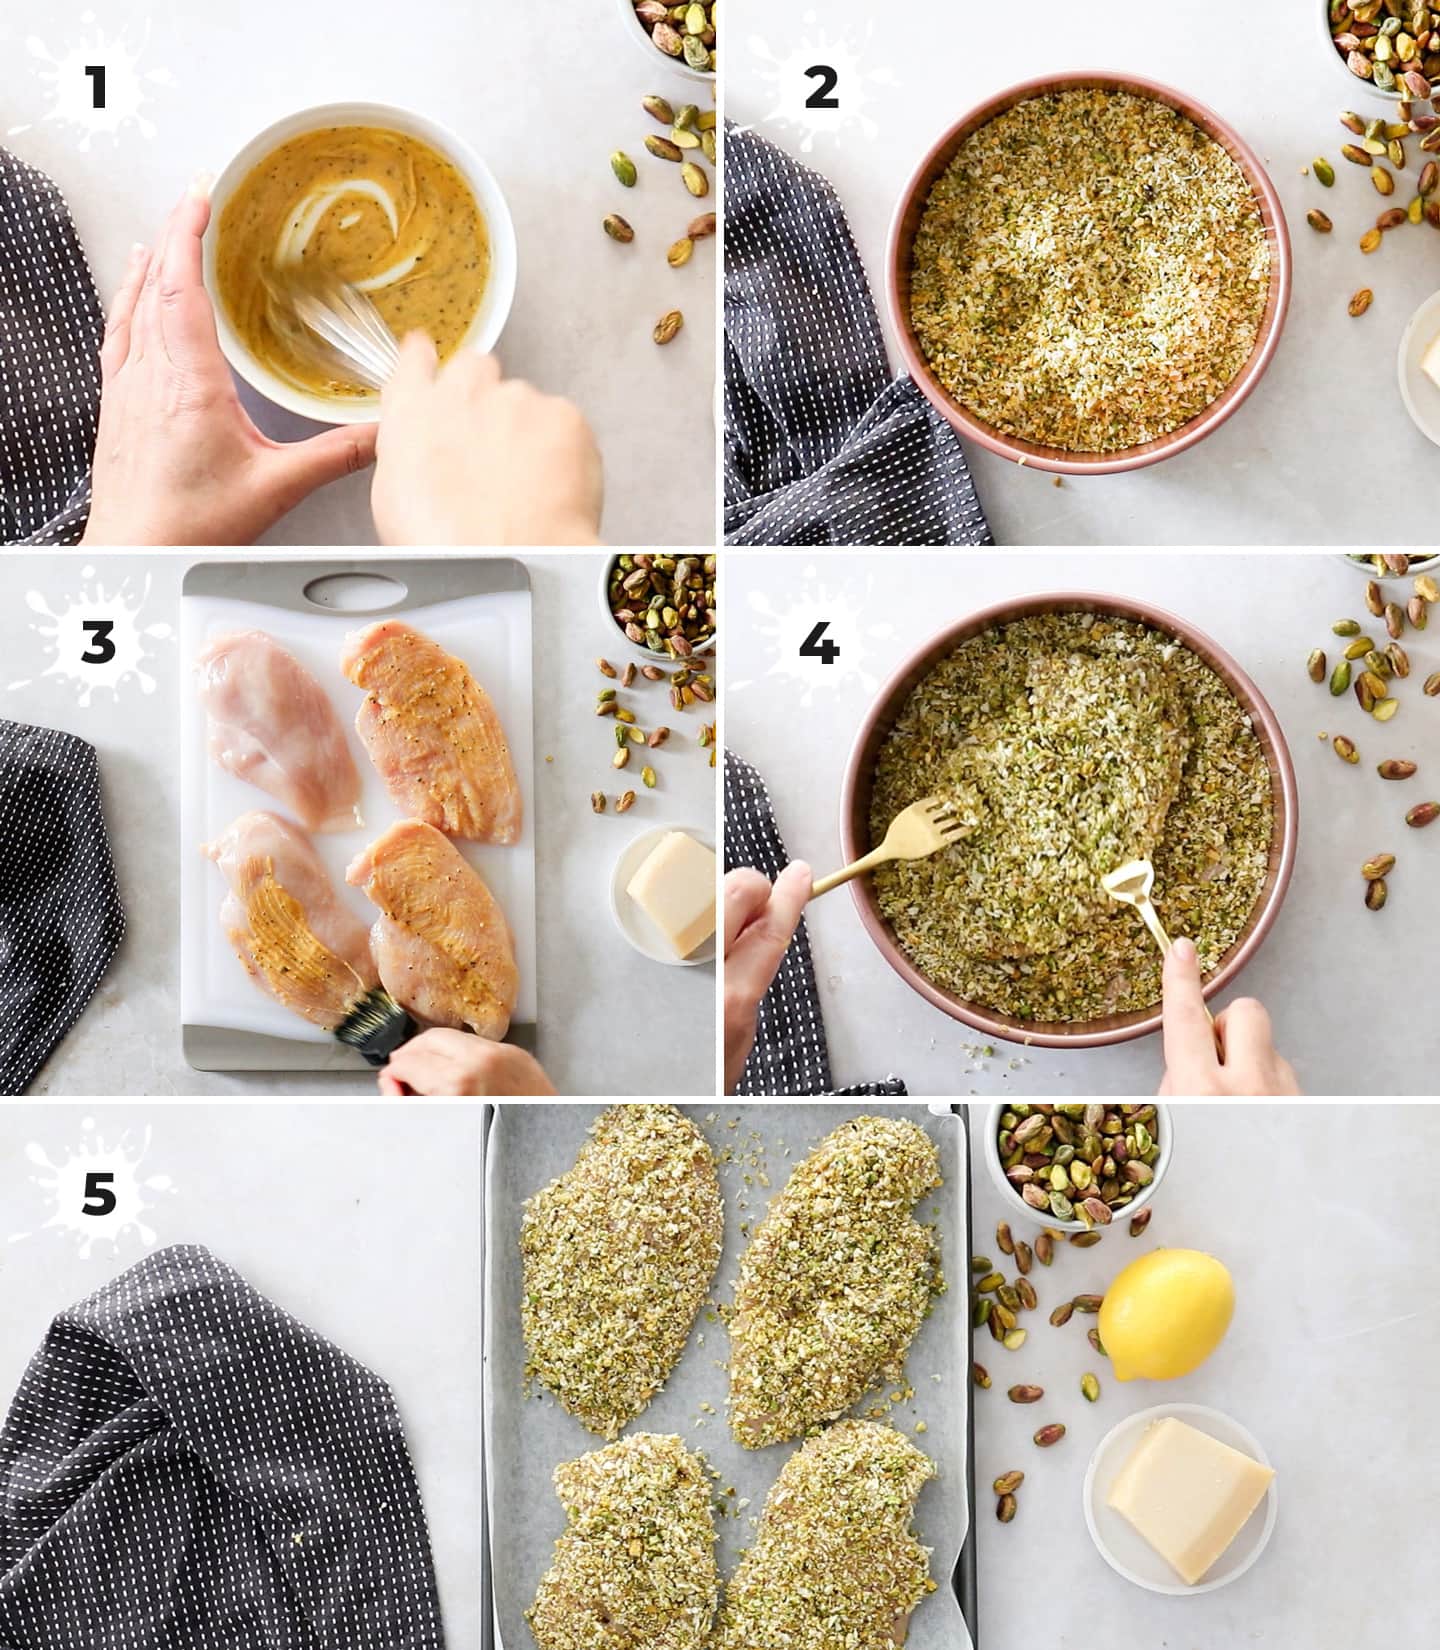 A collage of 5 images showing how to make pistachio chicken.